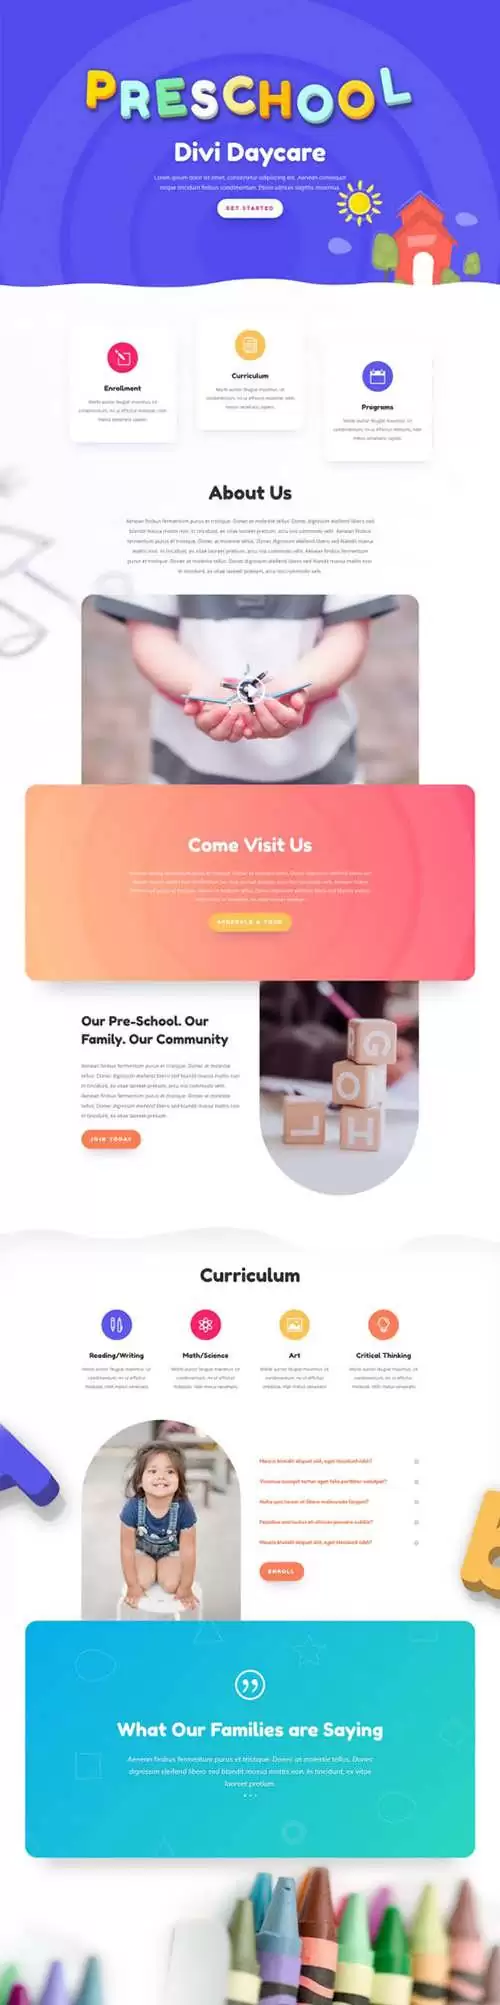 daycare landing page